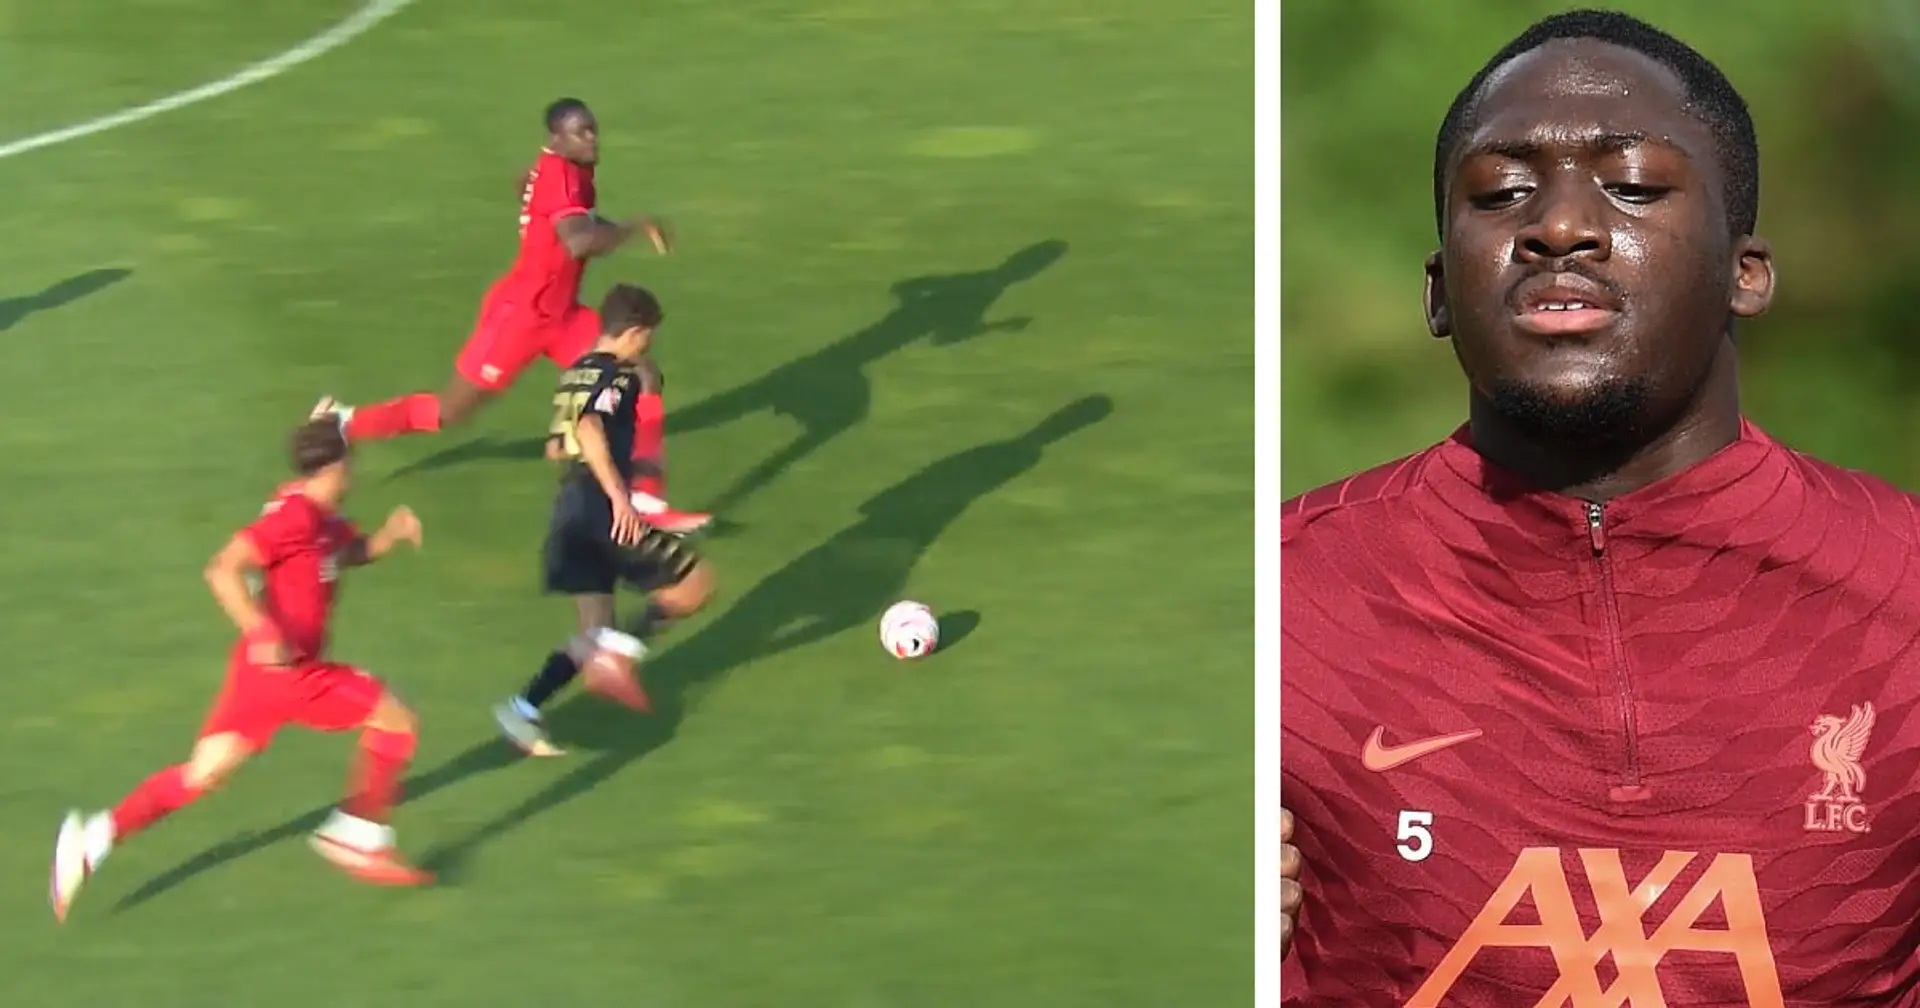 Van Dijk-esque: Ibrahima Konate's brilliant recovery after losing ball - spotted